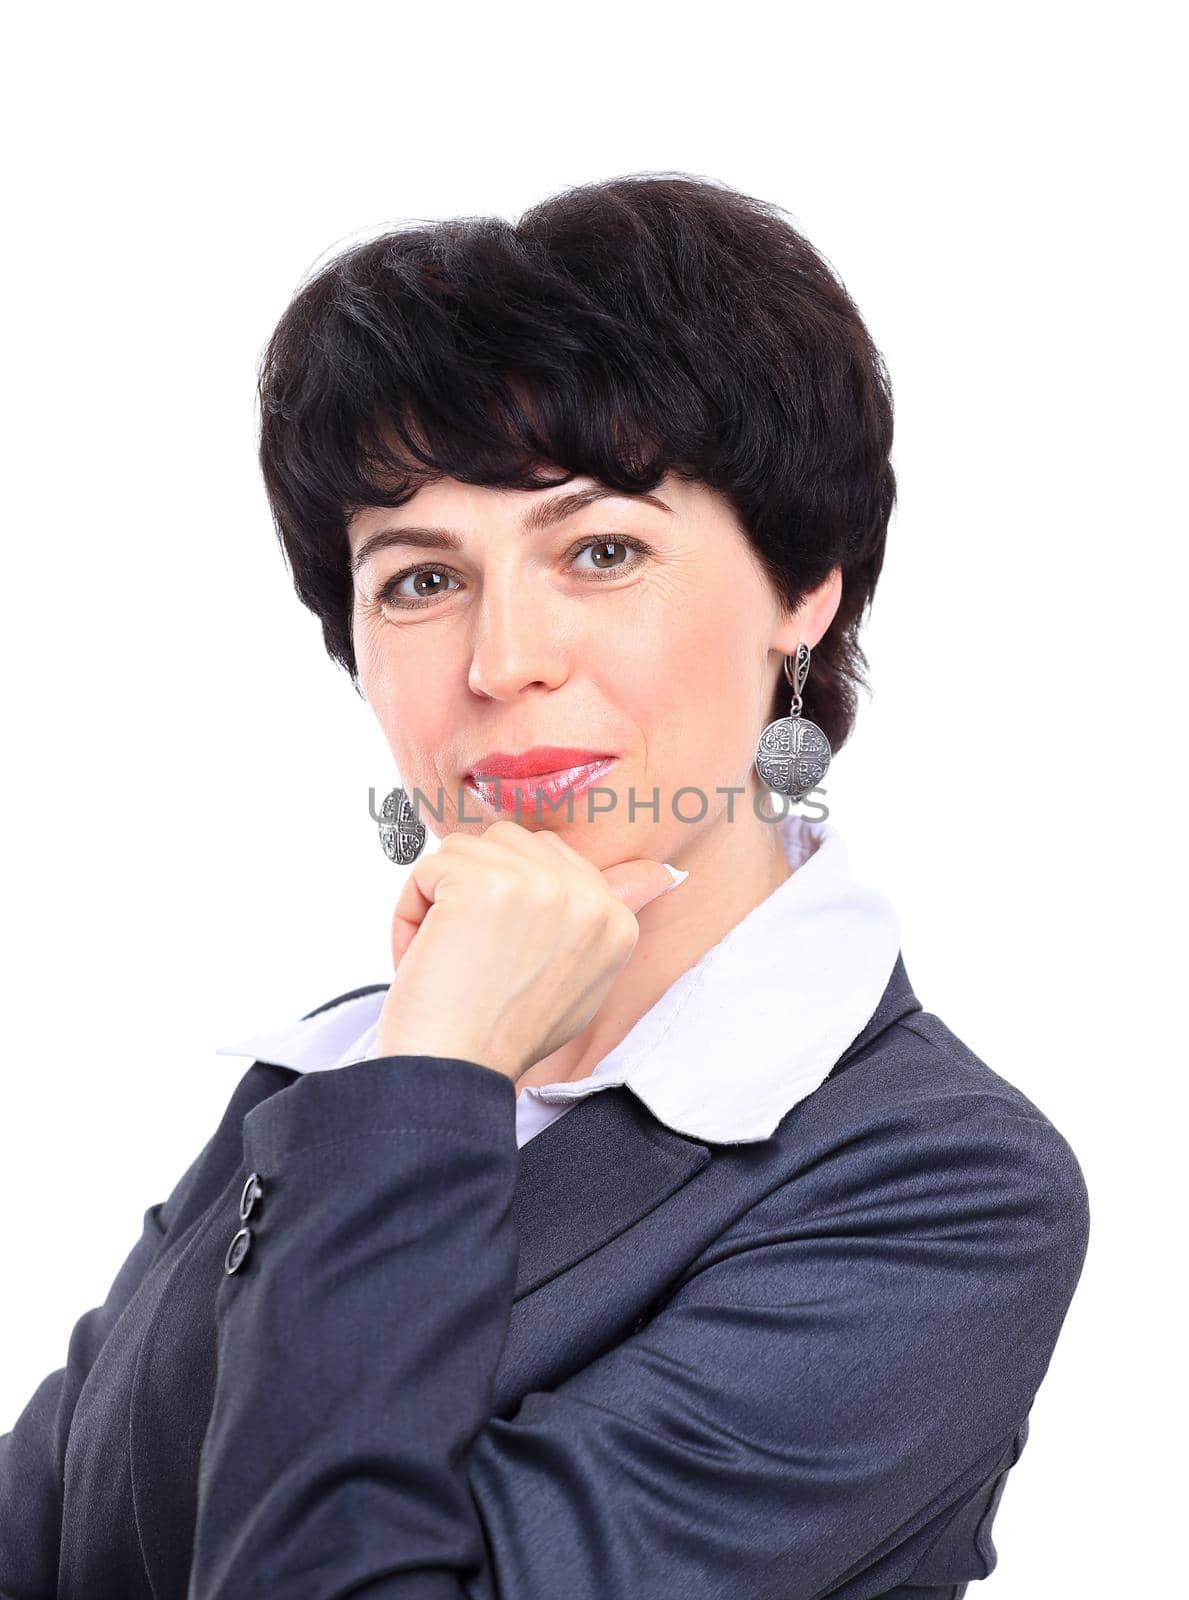 Smiling business woman. Isolated over white background